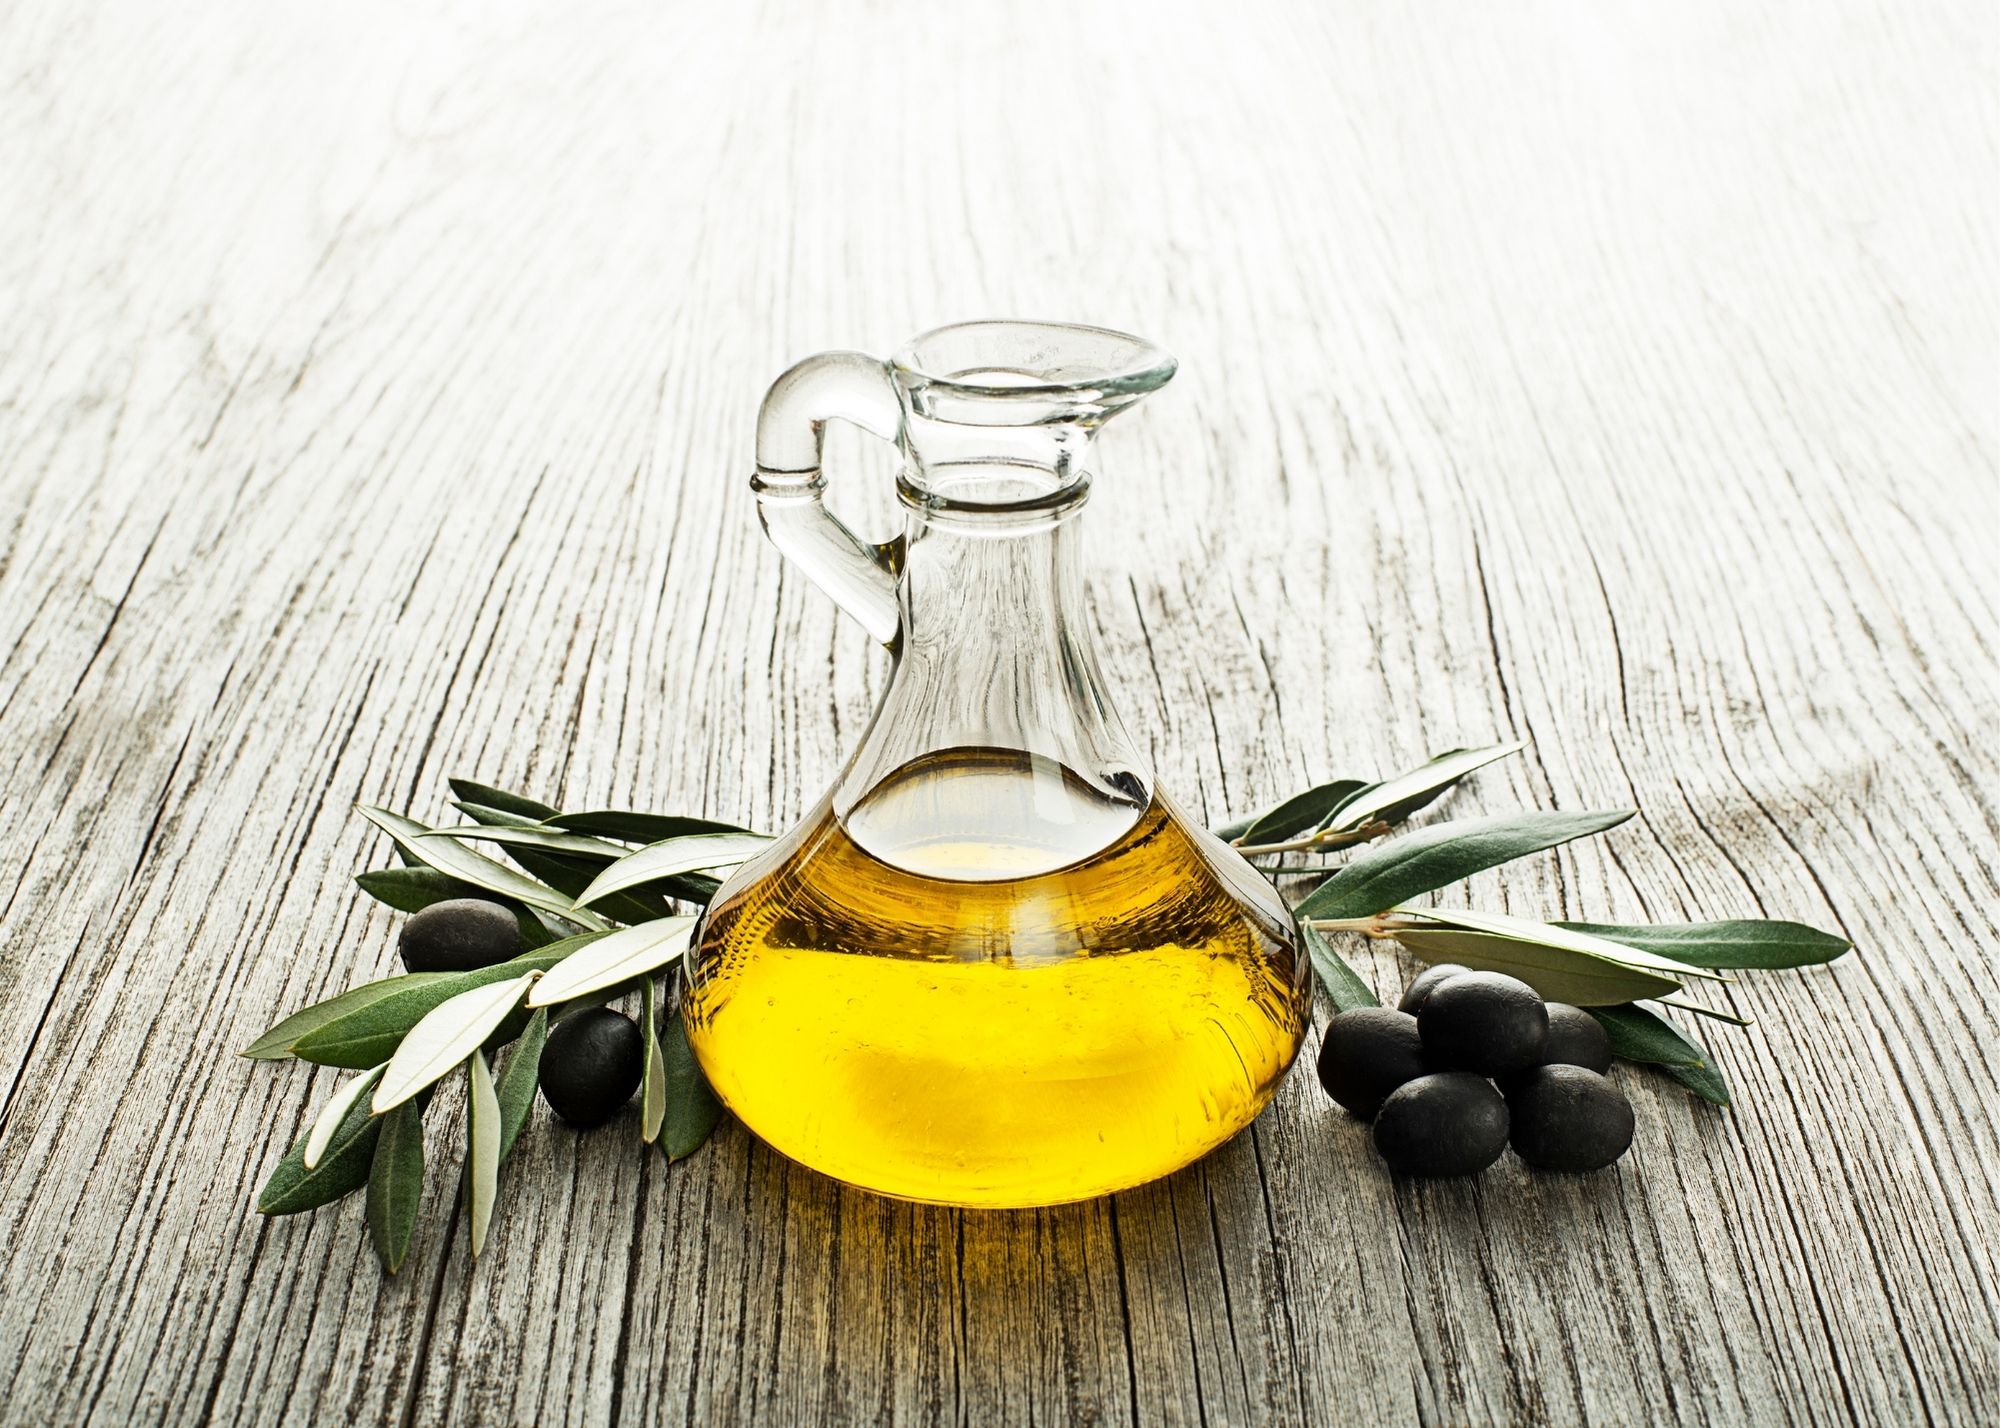 Why Is It Better to Buy EVOO At an Olive Oil Store? - Shop We Olive